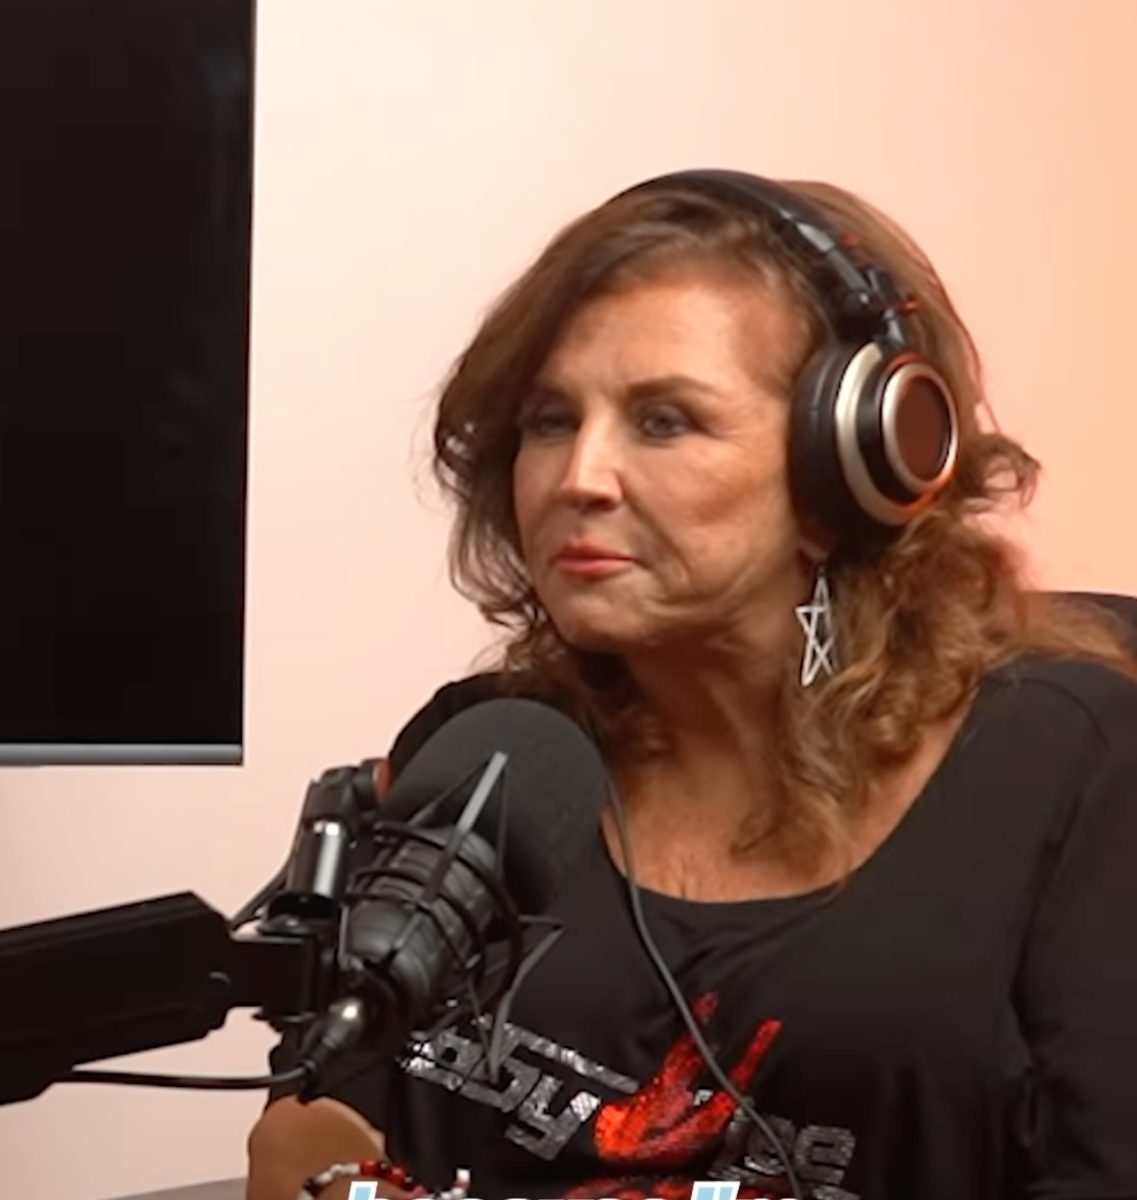 Abby Lee Miller Slammed After Making Bizarre and Creepy Comments on Podcast | Abby Lee Miller fans are left scratching their heads after her latest bizarre podcast interview.